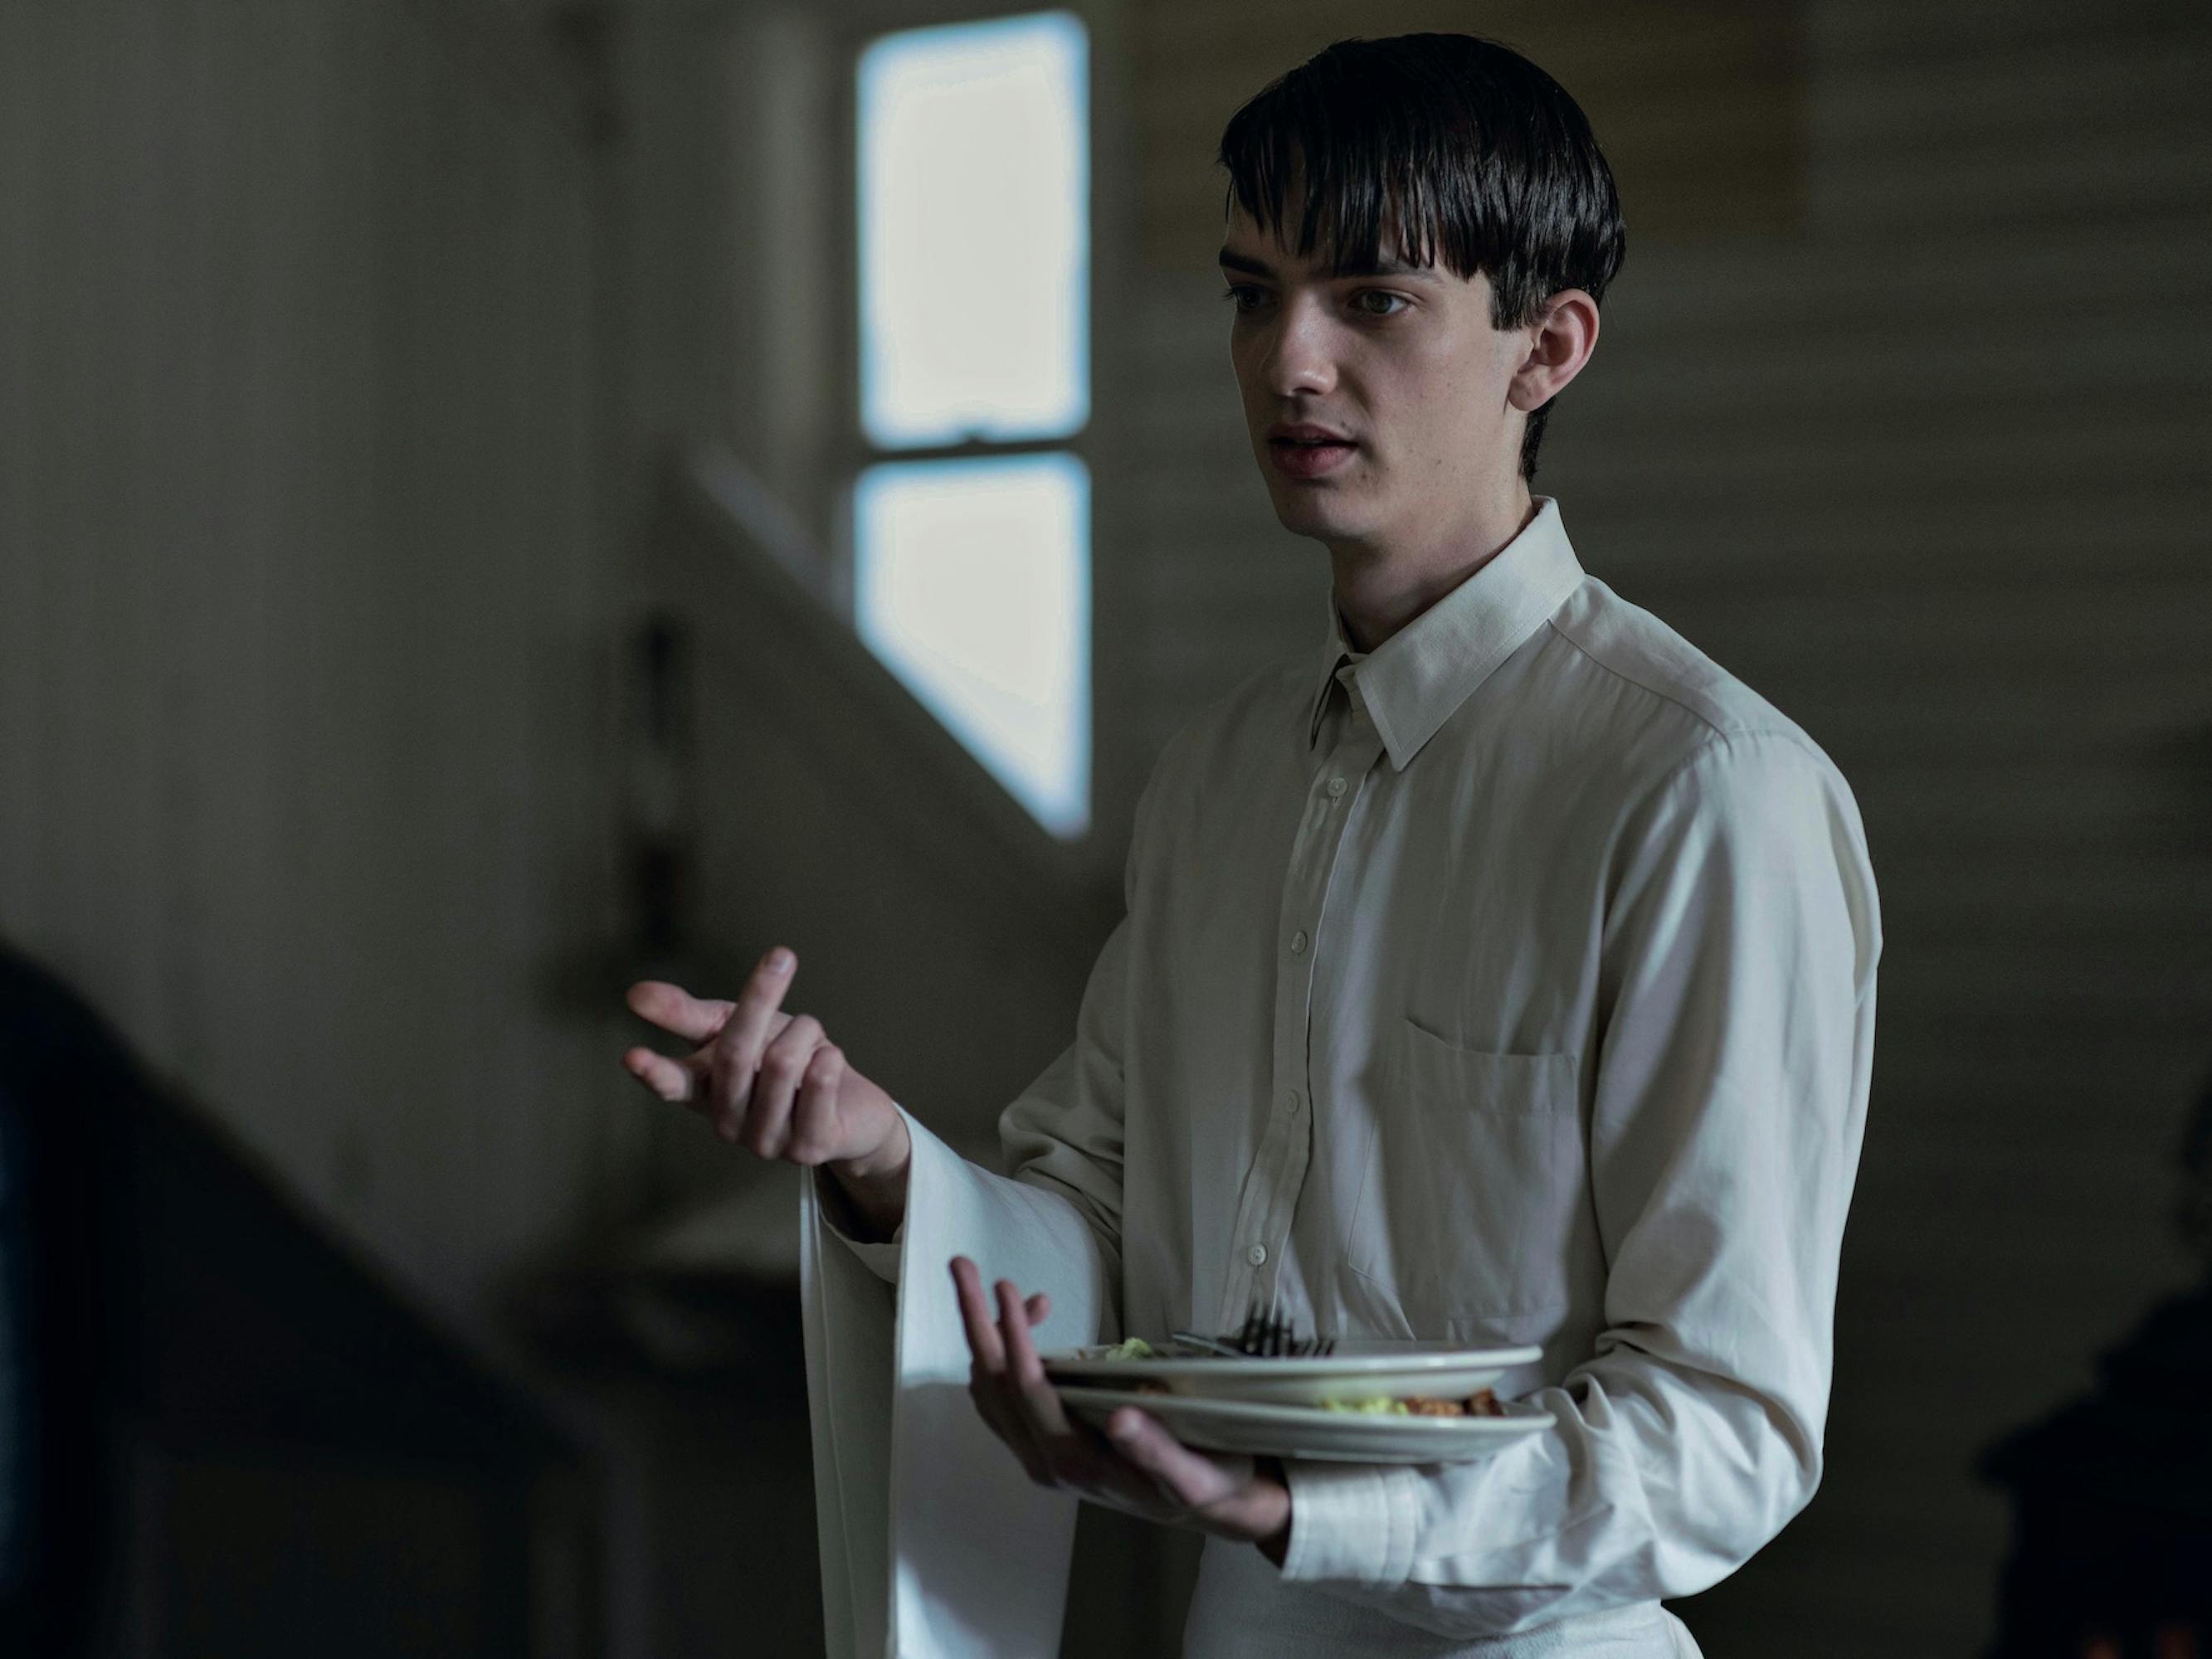 Peter Gordon (Kodi Smit-McPhee) wears a white buttoned down shirt and holds some plates in his arms. 